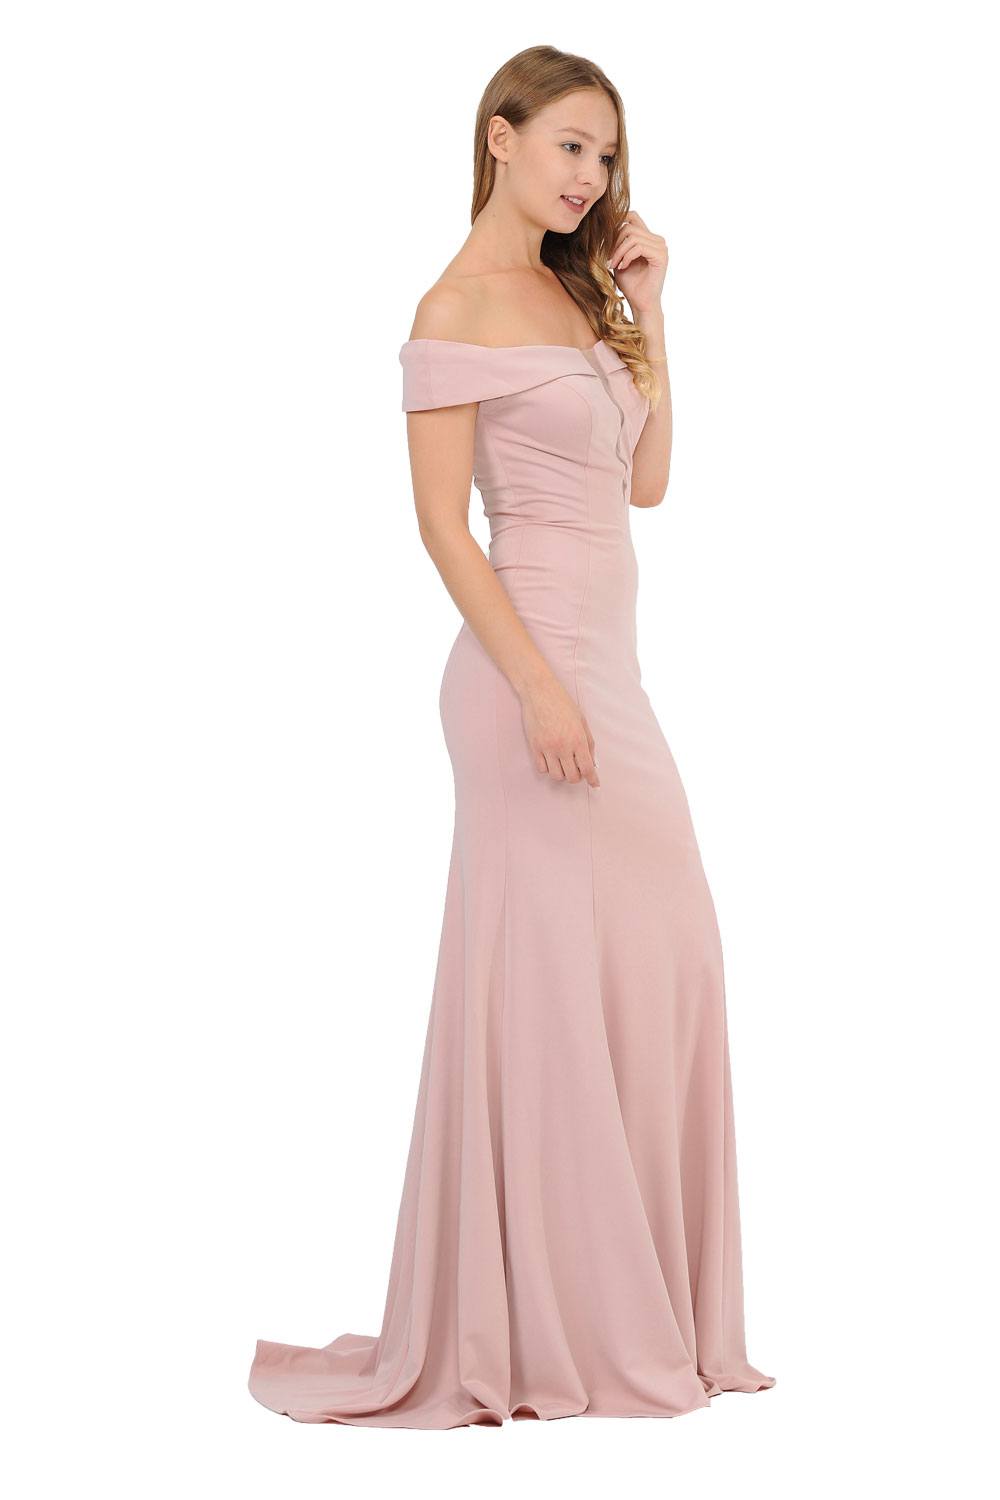 Off-Shoulder Mauve Long Formal Dress with Sheer Cut-Out Bodice